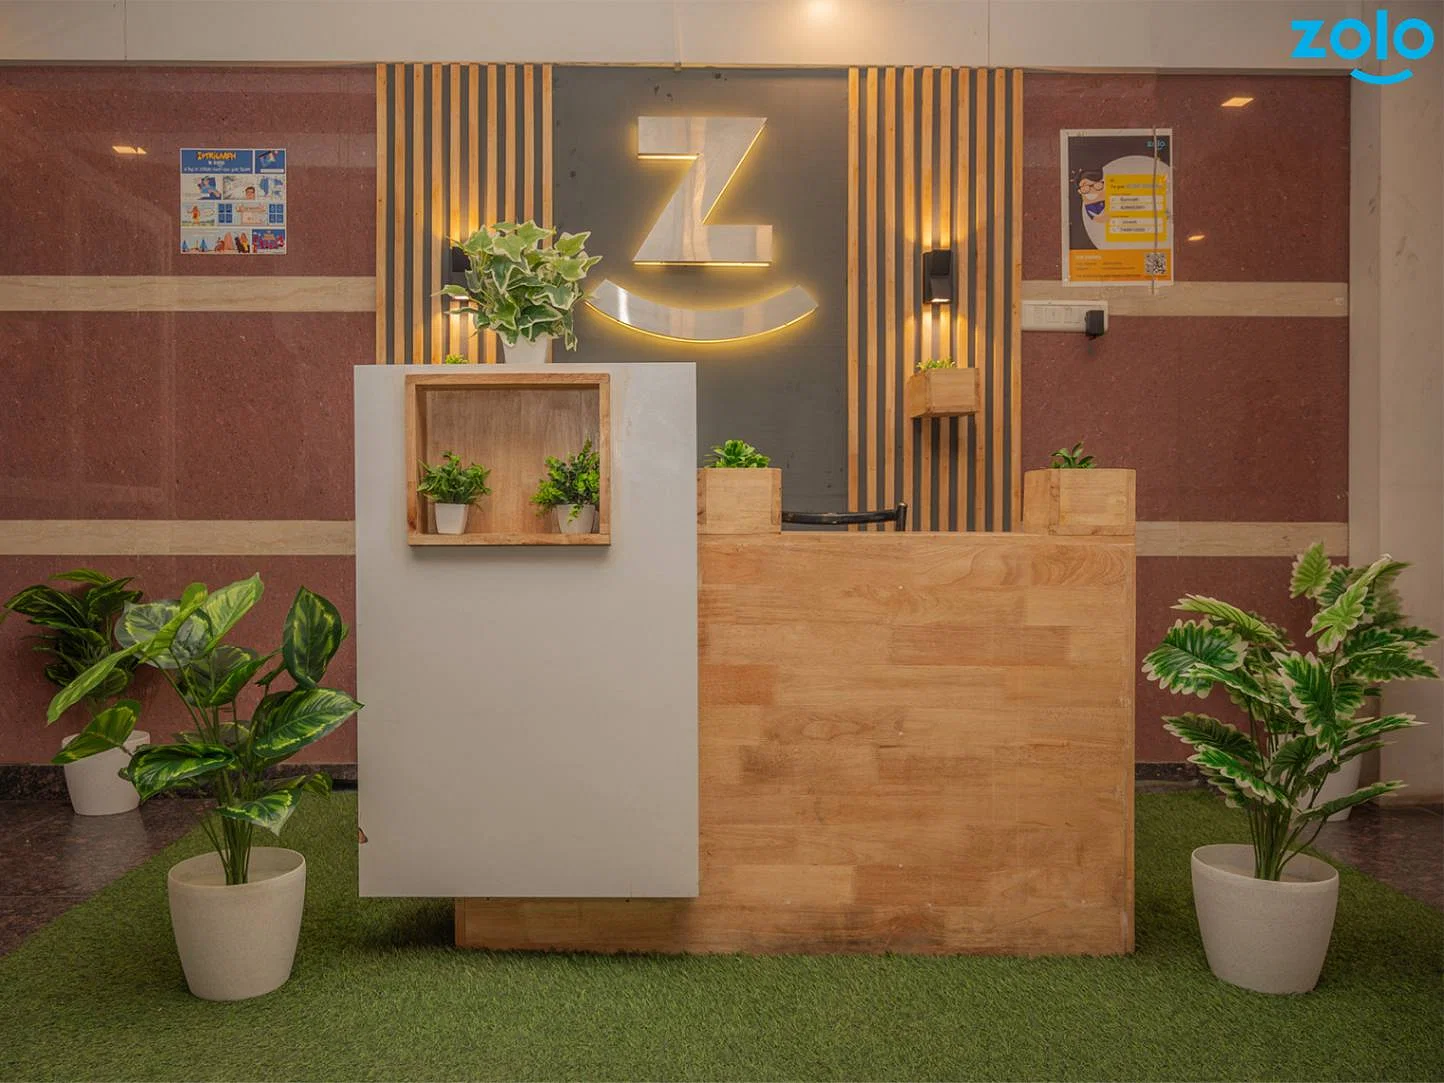 budget-friendly PGs and hostels for couple with single rooms with daily hopusekeeping-Zolo Highstreet C